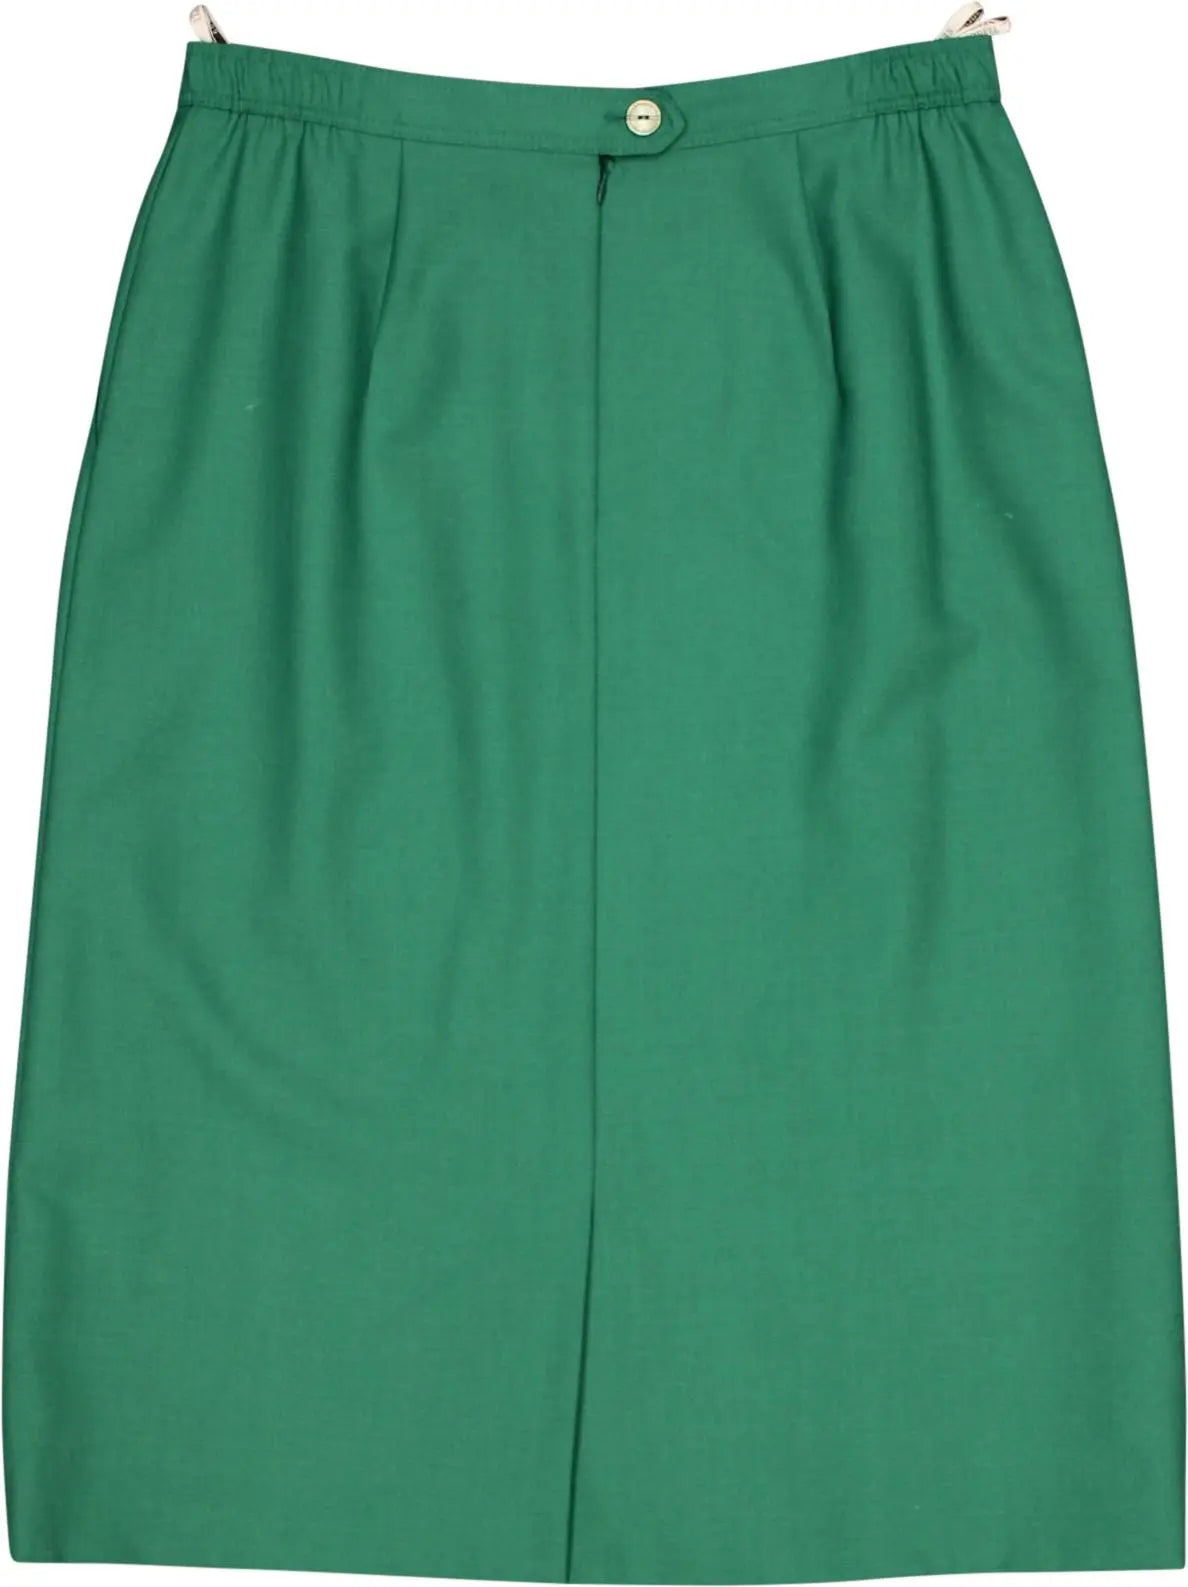 Seda Modell - Green Skirt by Seda Modell- ThriftTale.com - Vintage and second handclothing